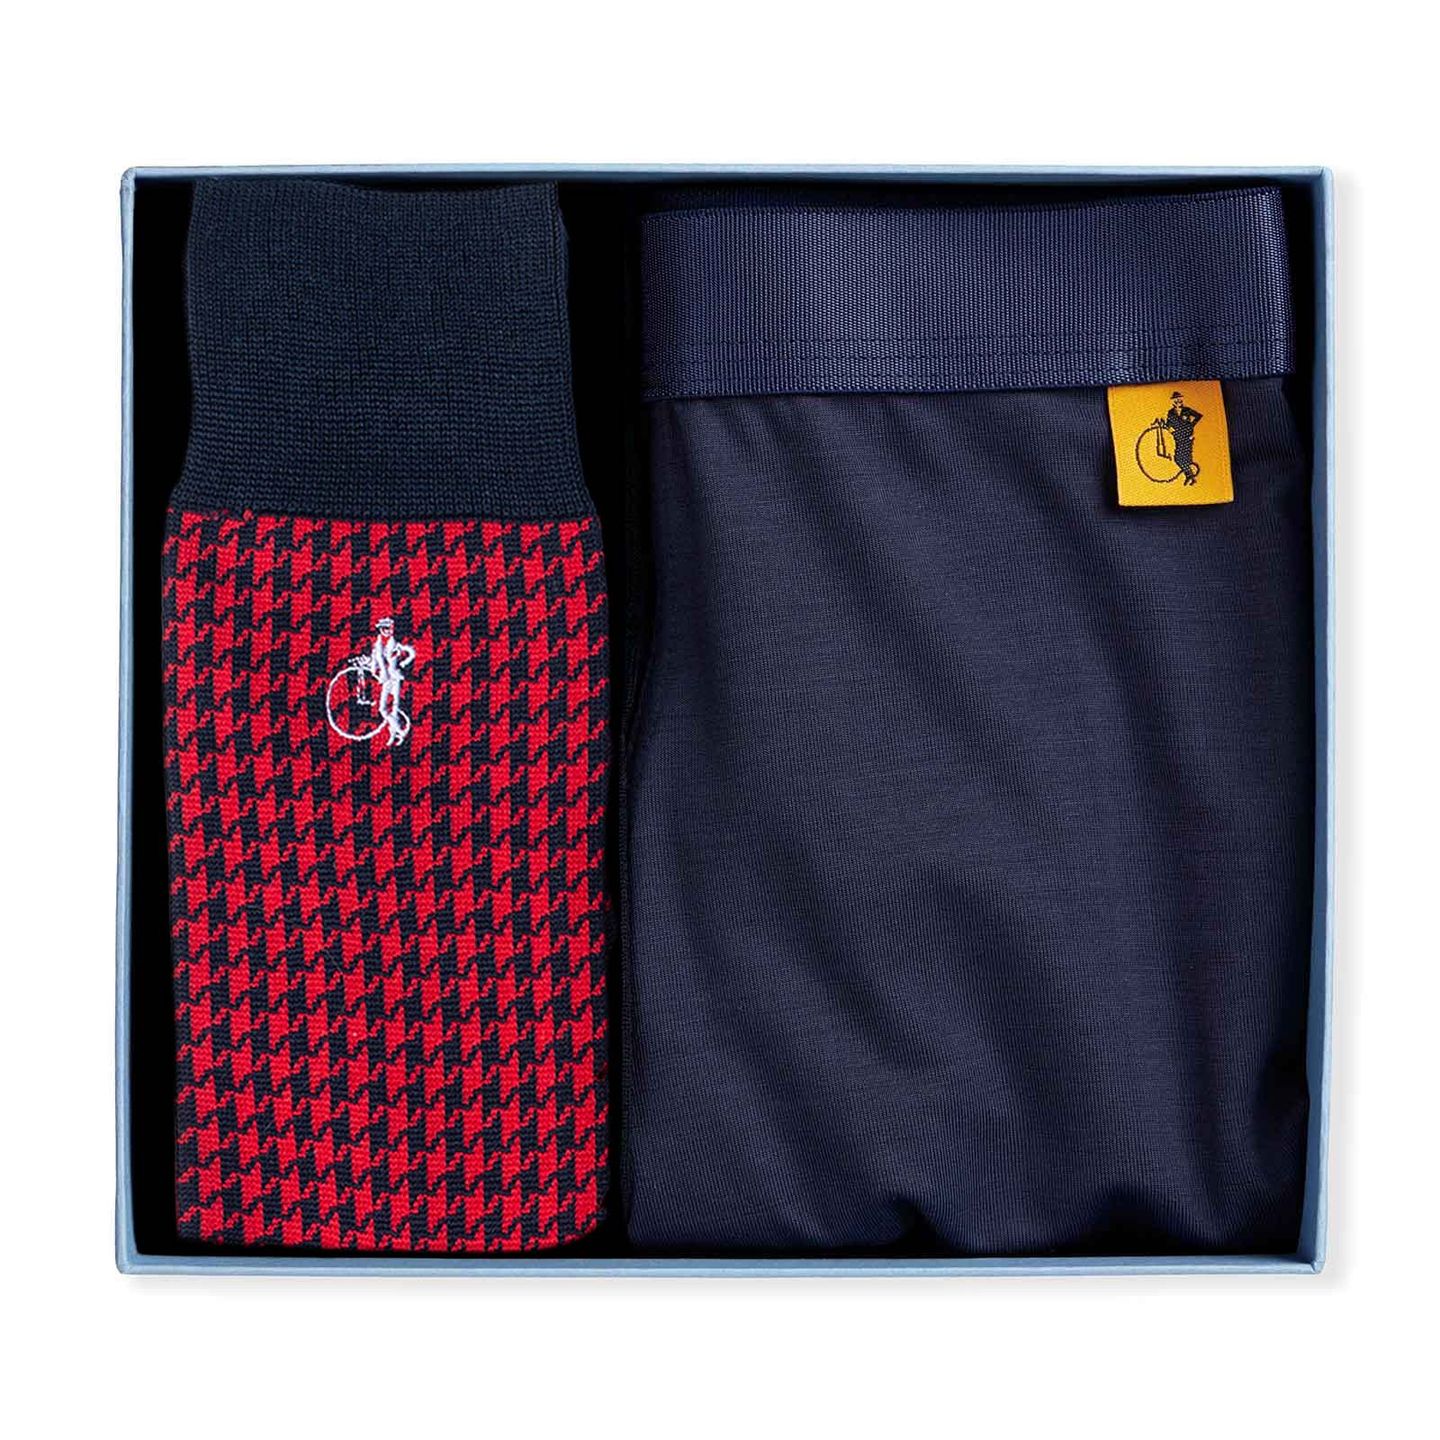 Navy LSC boxer and red and black chequered sock gift box